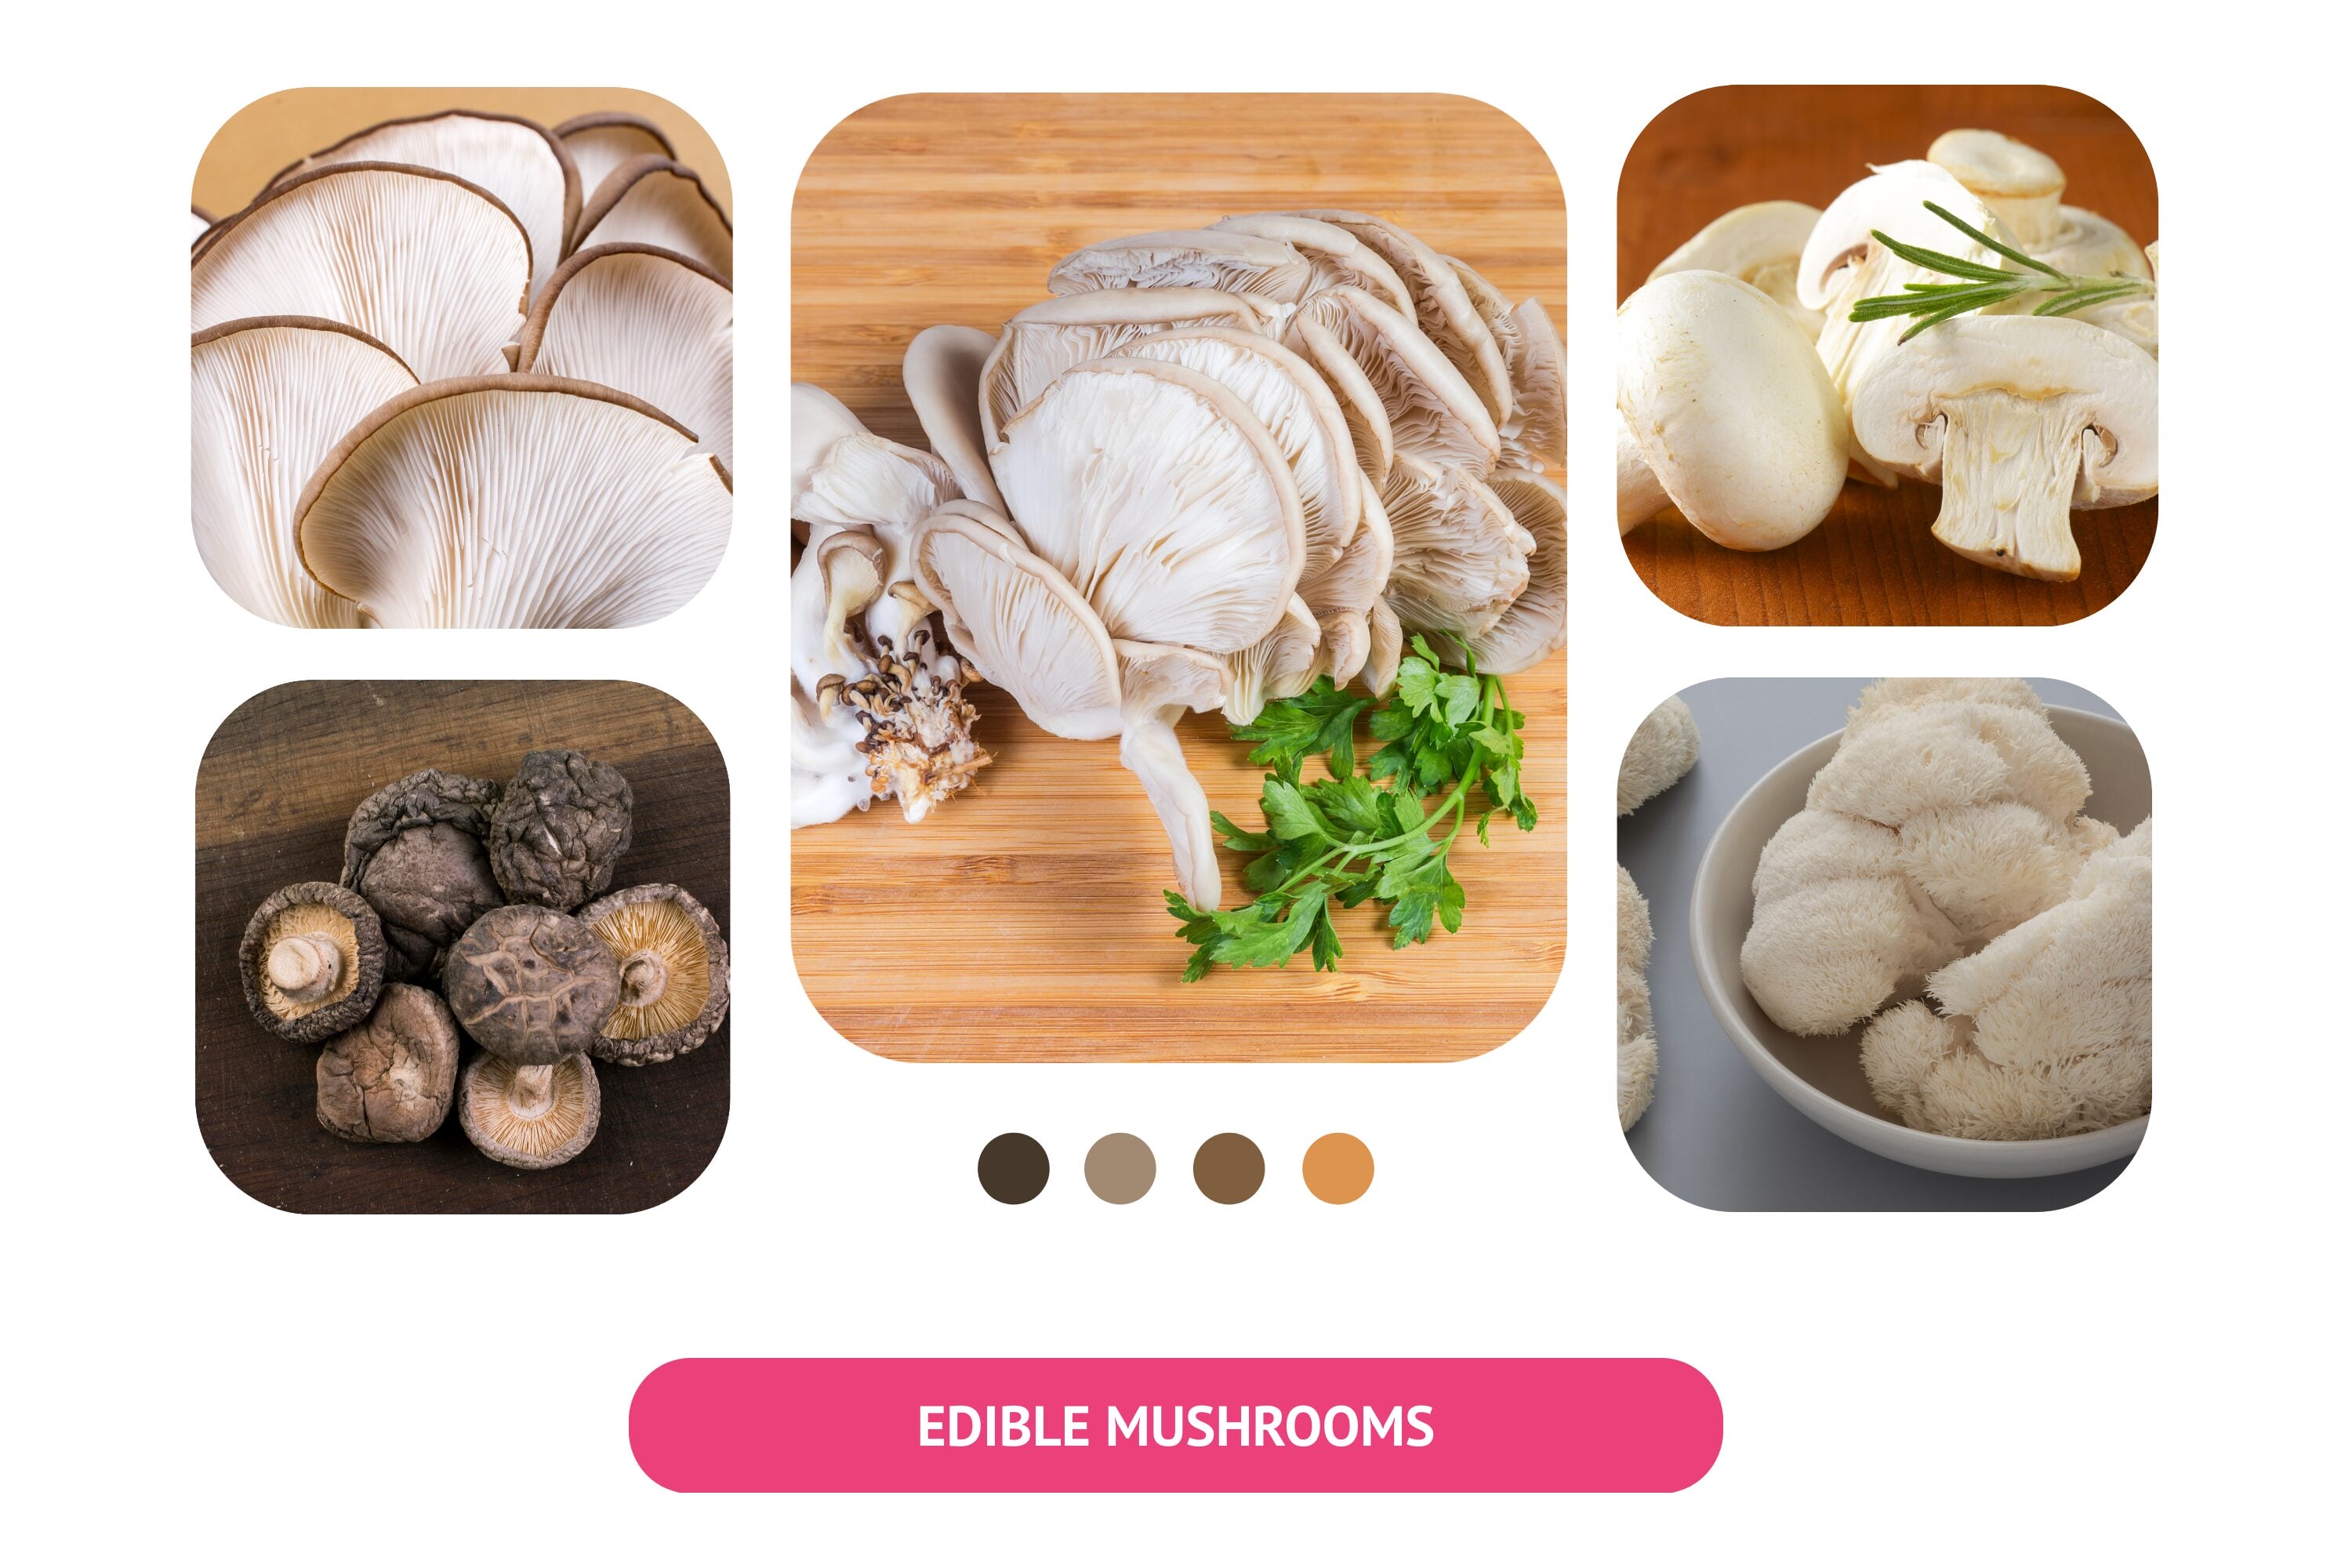 Edible mushrooms have diverse types and flavors.